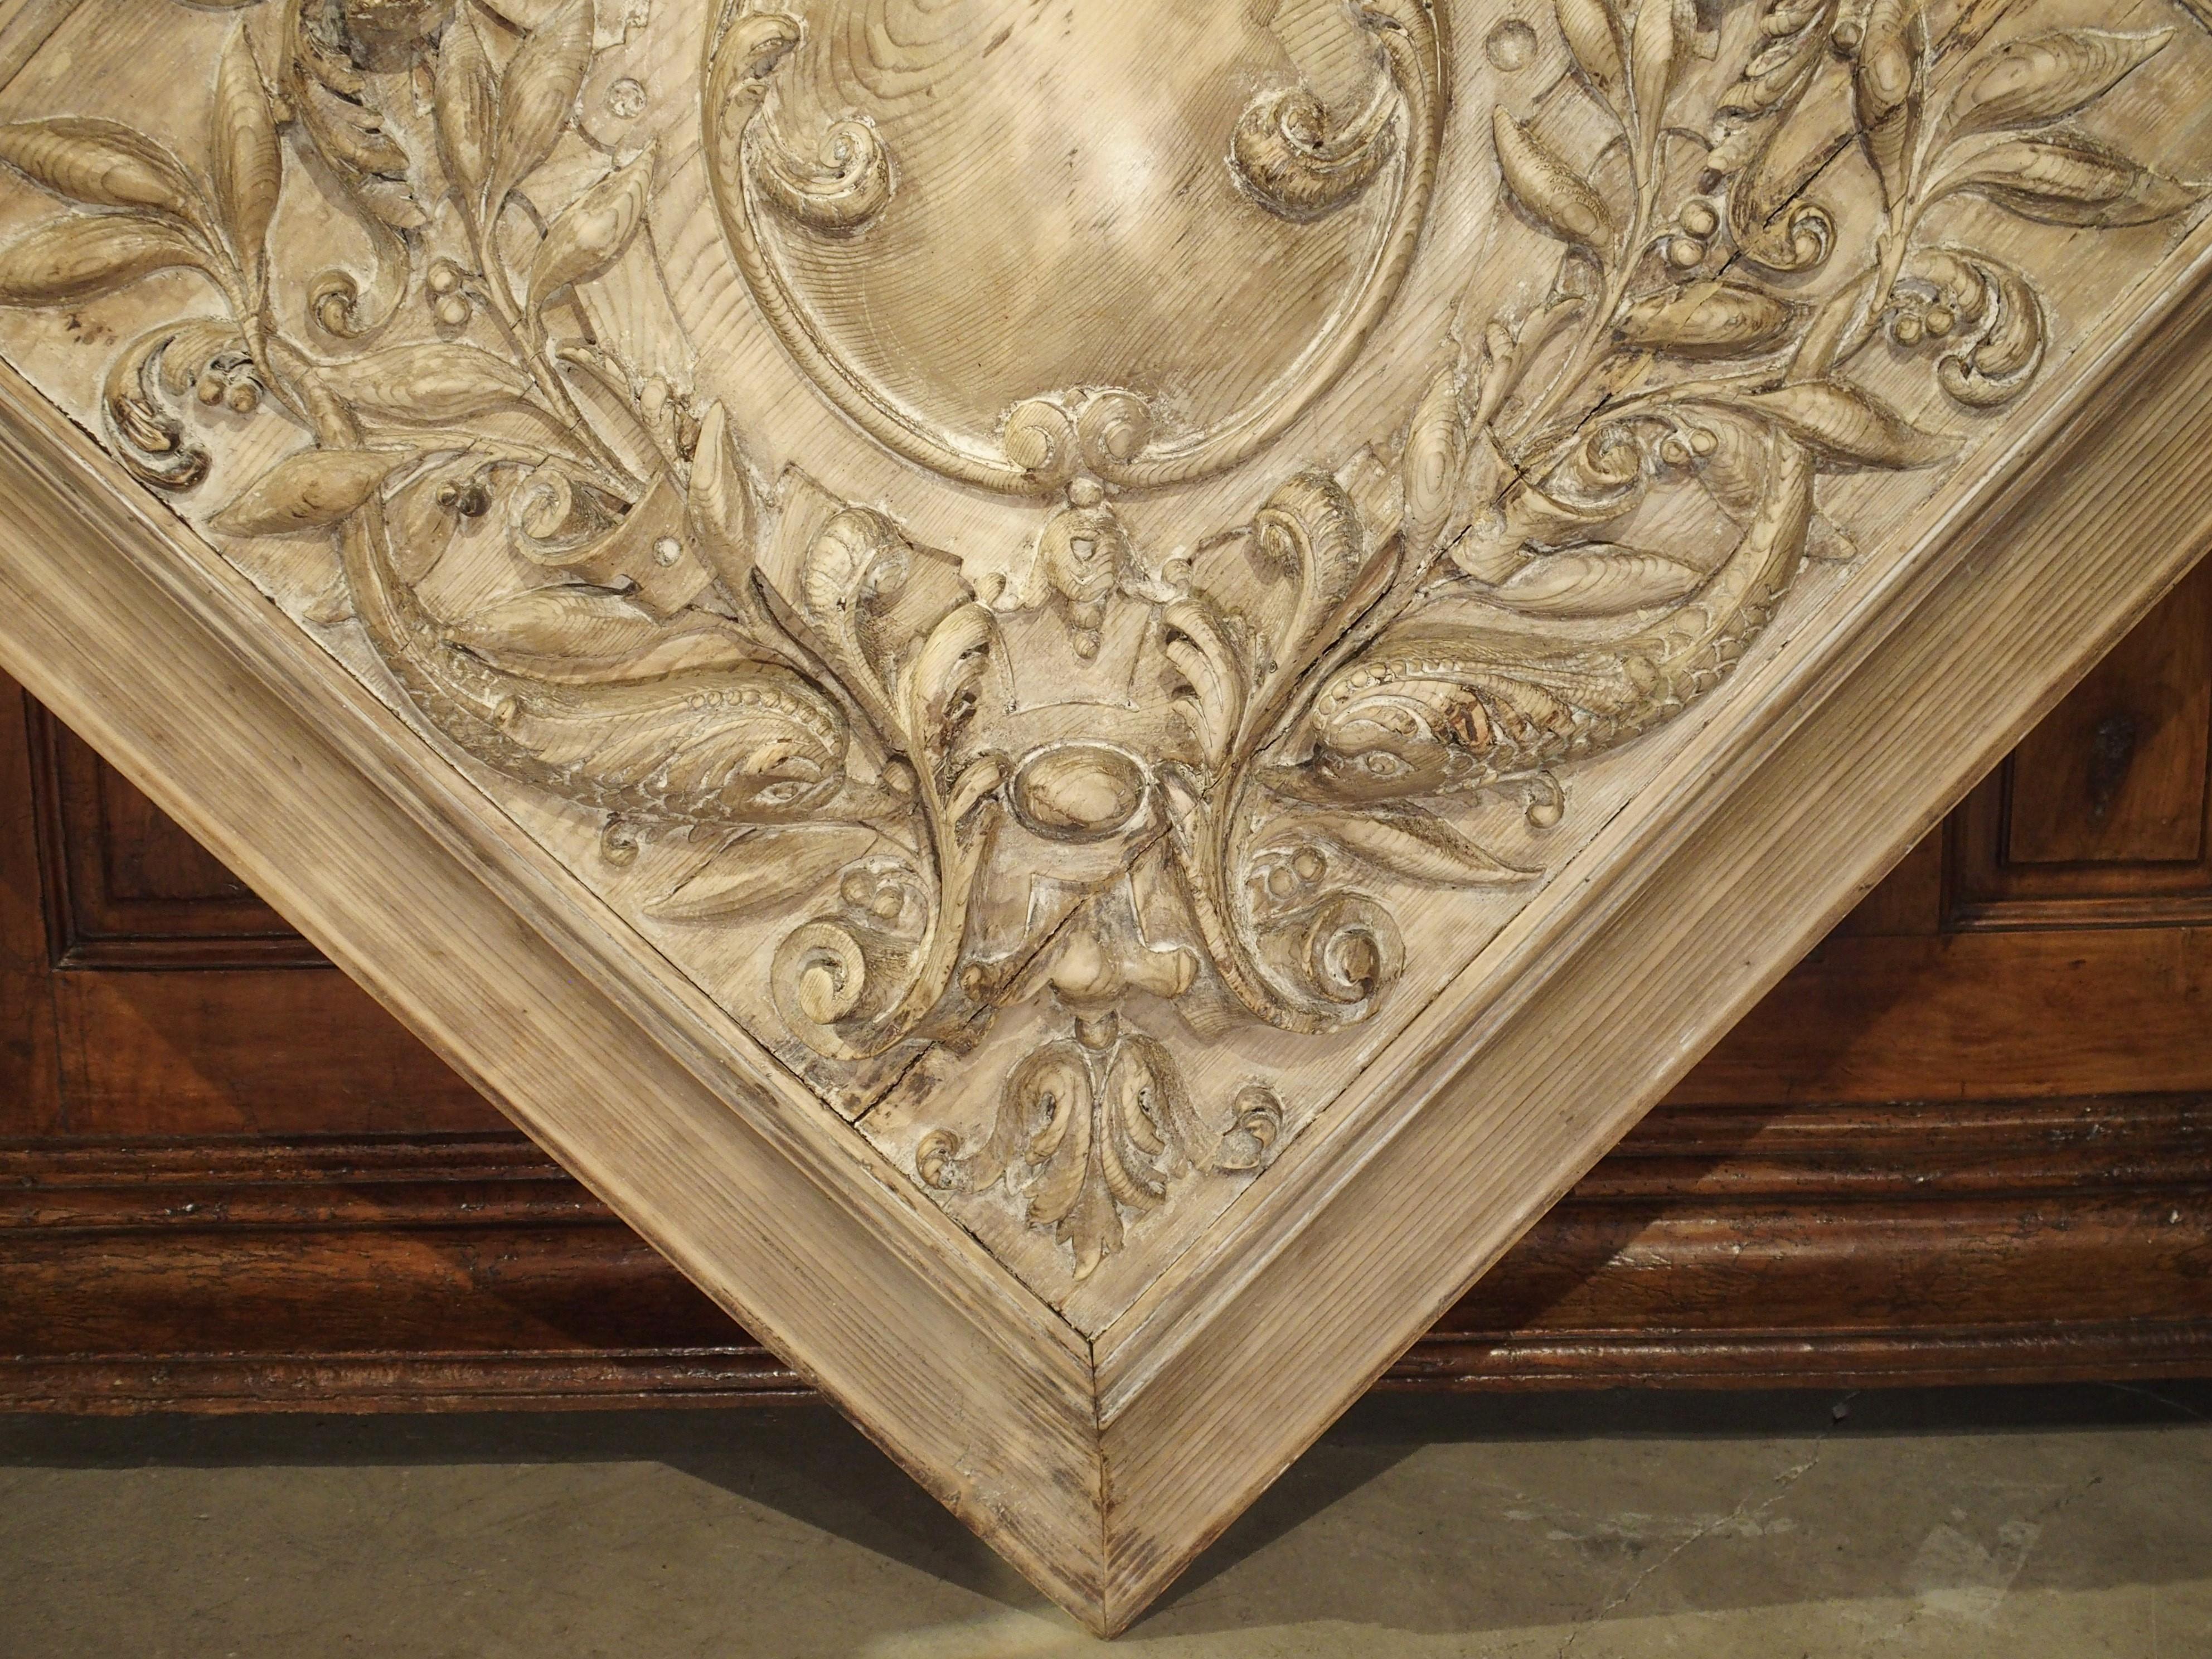 Hand-Carved 19th Century French Carved Square Panel with Dolphins, Foliage and Centre Crest